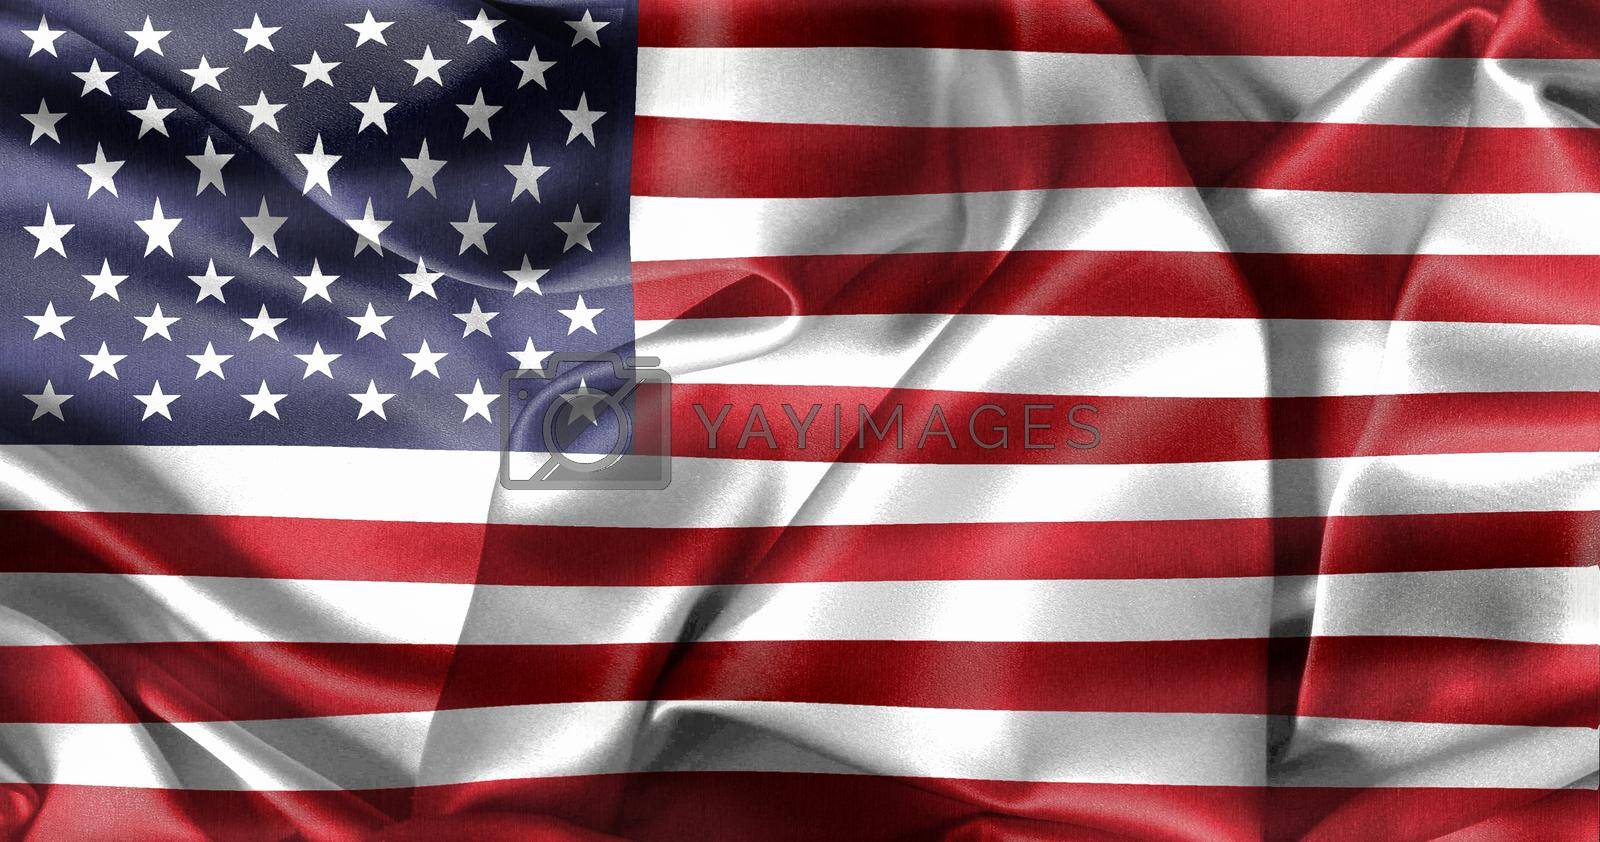 Royalty free image of 3D-Illustration of a USA flag - realistic waving fabric flag by MP_foto71